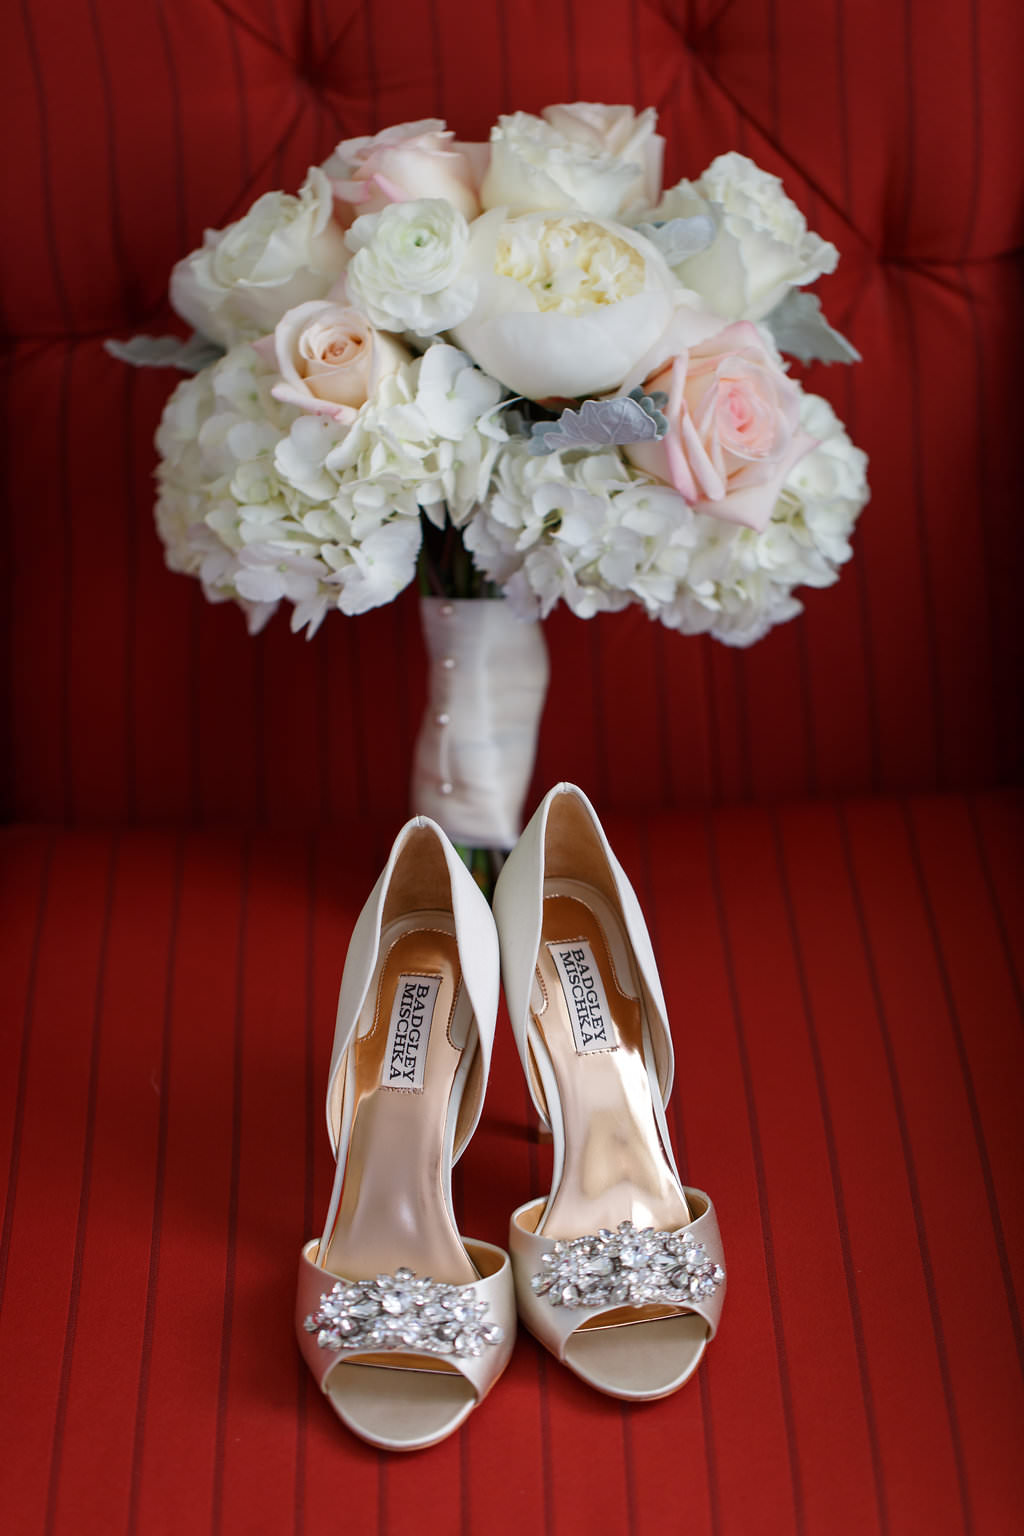 Bridal Champagne Open Toed Badgley Mischka Wedding Shoes with Rhinestone Brooch and Ivory and Blush Pink Hydrangea and Rose Bridal Wedding Bouquet